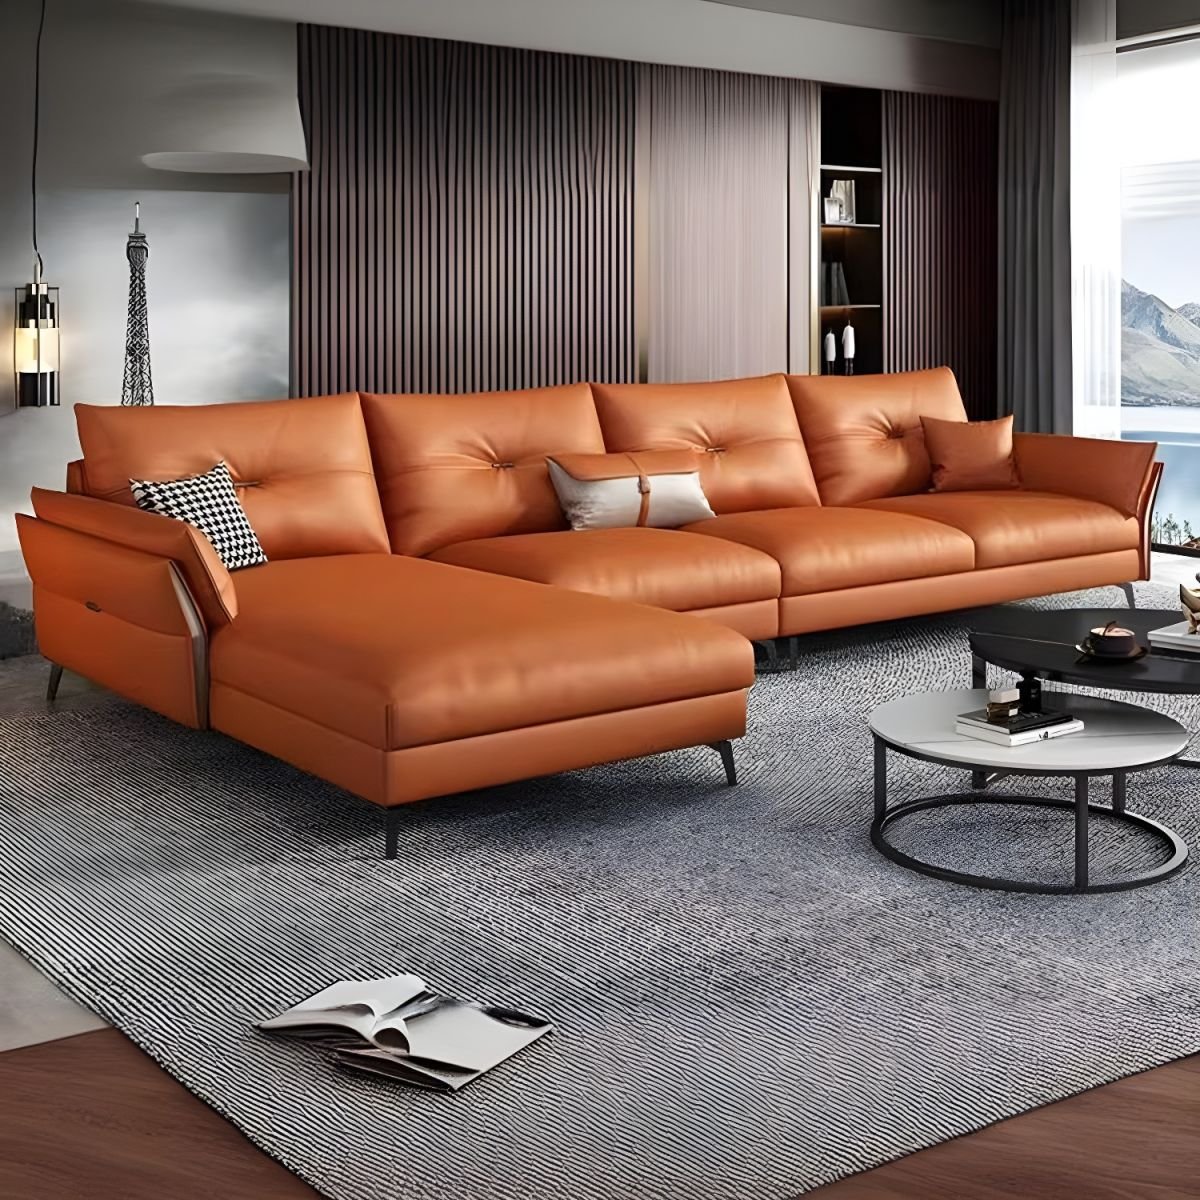 Faux Leather Modern Sectional Sofa with Flared Arm and Water Resistant - Orange 126"L x 67"W x 31.5"H Tech Cloth